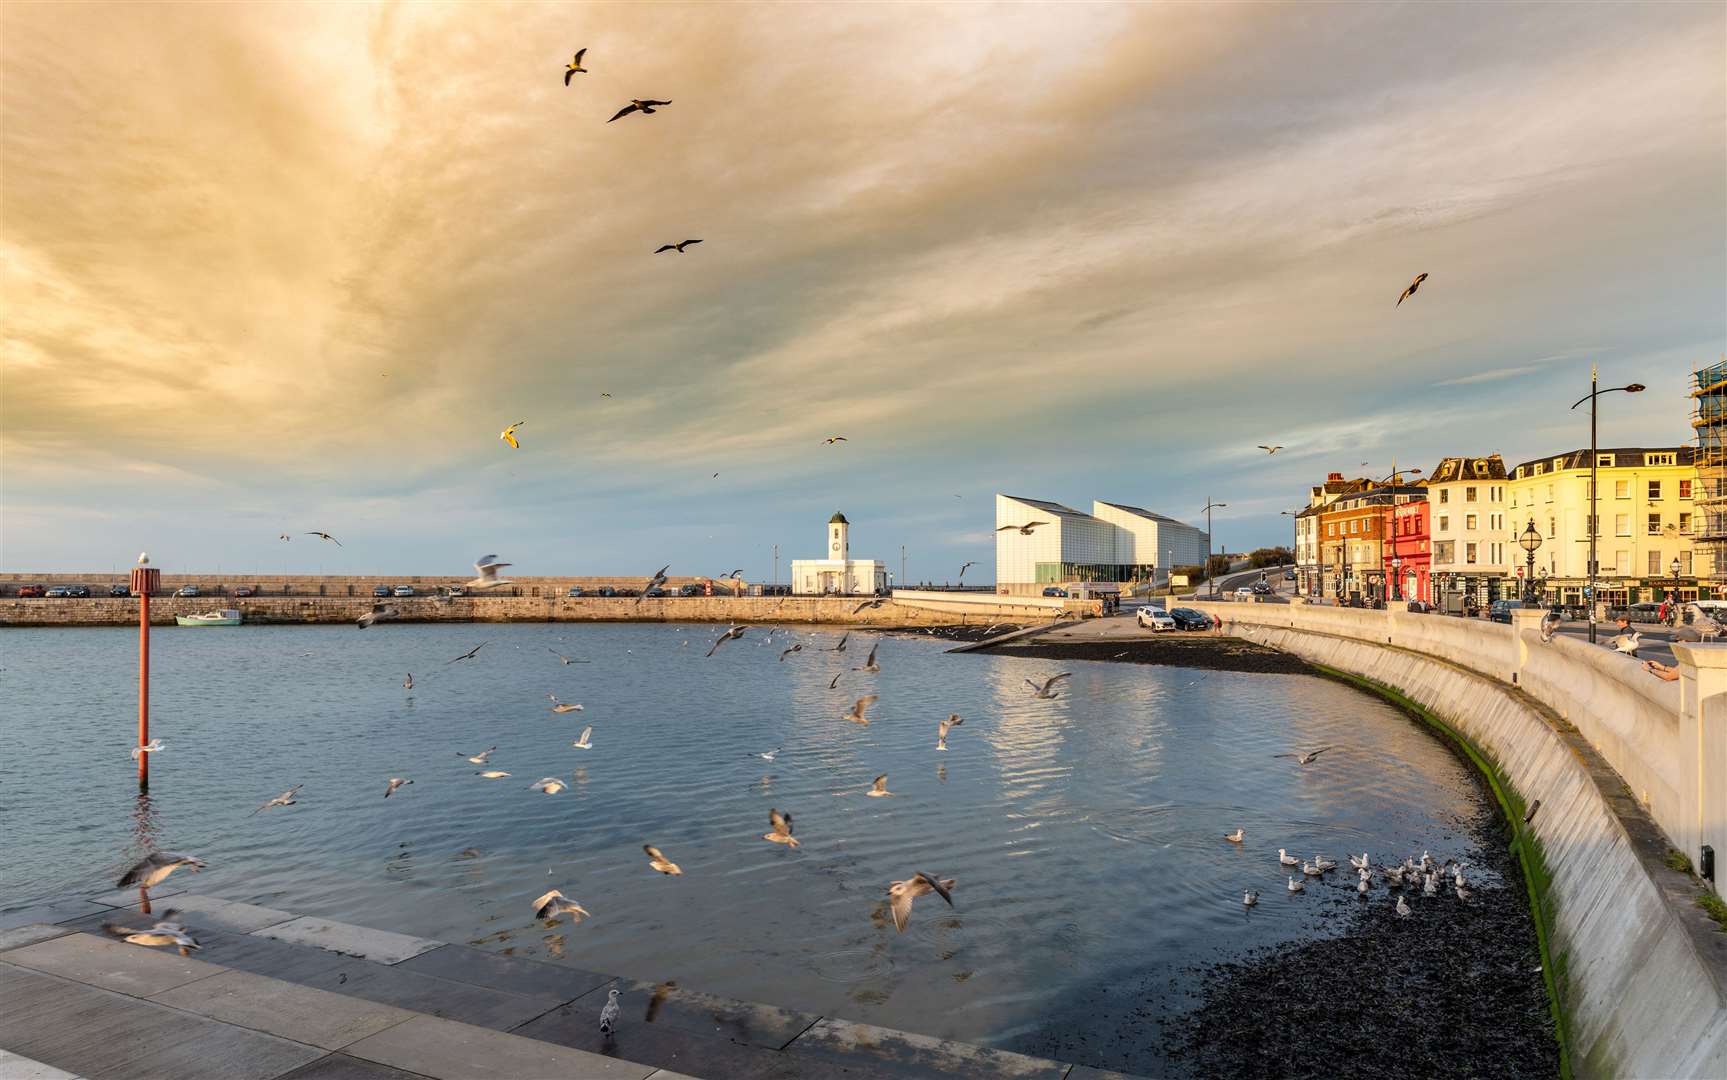 Margate came in third in the list of desirable coastal places